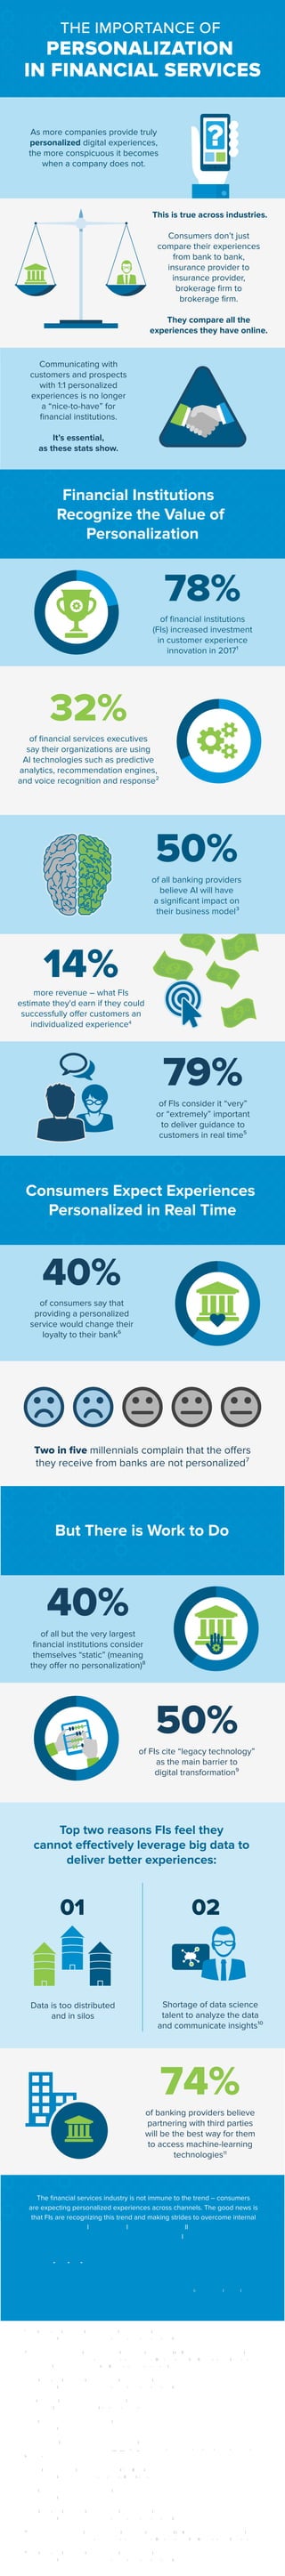 THE IMPORTANCE OF
PERSONALIZATION
IN FINANCIAL SERVICES
As more companies provide truly
personalized digital experiences,
the more conspicuous it becomes
when a company does not.
This is true across industries.
Consumers don’t just
compare their experiences
from bank to bank,
insurance provider to
insurance provider,
brokerage ﬁrm to
brokerage ﬁrm.
They compare all the
experiences they have online.
Communicating with
customers and prospects
with 1:1 personalized
experiences is no longer
a “nice-to-have” for
ﬁnancial institutions.
It’s essential,
as these stats show.
Financial Institutions
Recognize the Value of
Personalization
78%
of ﬁnancial institutions
(FIs) increased investment
in customer experience
innovation in 2017¹
50%
of all banking providers
believe AI will have
a signiﬁcant impact on
their business model³
79%
of FIs consider it “very”
or “extremely” important
to deliver guidance to
customers in real time⁵
32%
of ﬁnancial services executives
say their organizations are using
AI technologies such as predictive
analytics, recommendation engines,
and voice recognition and response²
14%more revenue – what FIs
estimate they'd earn if they could
successfully offer customers an
individualized experience4
Consumers Expect Experiences
Personalized in Real Time
40%
of consumers say that
providing a personalized
service would change their
loyalty to their bank⁶
Two in ﬁve millennials complain that the offers
they receive from banks are not personalized⁷
But There is Work to Do
40%
of all but the very largest
ﬁnancial institutions consider
themselves “static” (meaning
they offer no personalization)⁸
50%
of FIs cite “legacy technology”
as the main barrier to
digital transformation⁹
Top two reasons FIs feel they
cannot effectively leverage big data to
deliver better experiences:
The ﬁnancial services industry is not immune to the trend – consumers
are expecting personalized experiences across channels. The good news is
that FIs are recognizing this trend and making strides to overcome internal
barriers to deliver personalization. But they still have work to do,
and Evergage is here to help.
Data is too distributed
and in silos
Shortage of data science
talent to analyze the data
and communicate insights¹⁰
01 02
74%
of banking providers believe
partnering with third parties
will be the best way for them
to access machine-learning
technologies11
1
Efma, Infosys-Finacle and Digital Banking Report, “Innovation in Retail Banking 2017,” Oct 2017,
https://theﬁnancialbrand.com/68280/innovation-banking-trends-repot-efma-digital-transformation/
2
Narrative Science and National Business Research Institute, “Outlook on Artiﬁcial Intelligence in the Enterprise 2016,” July 2016,
https://narrativescience.com/Resource-Library/PR/62-of-organizations-will-be-using-artiﬁcial-intelligence-ai-technologies-by-2018htt
ps://theﬁnancialbrand.com/63322/artiﬁcial-intelligence-ai-banking-big-data-analytics/.
³ Efma, Infosys-Finacle and Digital Banking Report, “Innovation in Retail Banking 2017,” Oct 2017,
https://theﬁnancialbrand.com/68280/innovation-banking-trends-repot-efma-digital-transformation/
⁴ Oracle, “The Era I Enterprise: Ready for Anything,” April 2016,
http://www.oracle.com/us/industries/oracle-era-ready-anything-2969053.pdf.
⁵ Digital Banking Report, “The Power of Personalization in Banking,” 2016,
https://www.digitalbankingreport.com/dbr/dbr242/.
⁶ Accenture Consulting, “2016 North America Consumer Digital Banking Survey,” 2016,
https://www.accenture.com/t20160609T222453__w__/us-en/_acnmedia/PDF-22/Accenture-2016-North-America-Consumer-Digita
l-Banking-Survey.pdf.
⁷ Jeffry Pilcher, The Financial Brand. “50 Facts Revealing Millennials’ Mindset and Myths About Money,”June 2015.
https://theﬁnancialbrand.com/52223/50-facts-about-millennials-and-money/
⁸ Digital Banking Report, “The Power of Personalization in Banking,” 2016,
https://www.digitalbankingreport.com/dbr/dbr242/.
⁹ Efma, Infosys-Finacle and Digital Banking Report, “Innovation in Retail Banking 2017,” Oct 2017,
https://theﬁnancialbrand.com/68280/innovation-banking-trends-repot-efma-digital-transformation/
10
Narrative Science and National Business Research Institute, “Outlook on Artiﬁcial Intelligence in the Enterprise 2016,” July 2016,
https://narrativescience.com/Resource-Library/PR/62-of-organizations-will-be-using-artiﬁcial-intelligence-ai-technologies-by-2018.
11
Efma, Infosys-Finacle and Digital Banking Report, “Innovation in Retail Banking 2017,” Oct 2017,
https://theﬁnancialbrand.com/68280/innovation-banking-trends-repot-efma-digital-transformation/
 